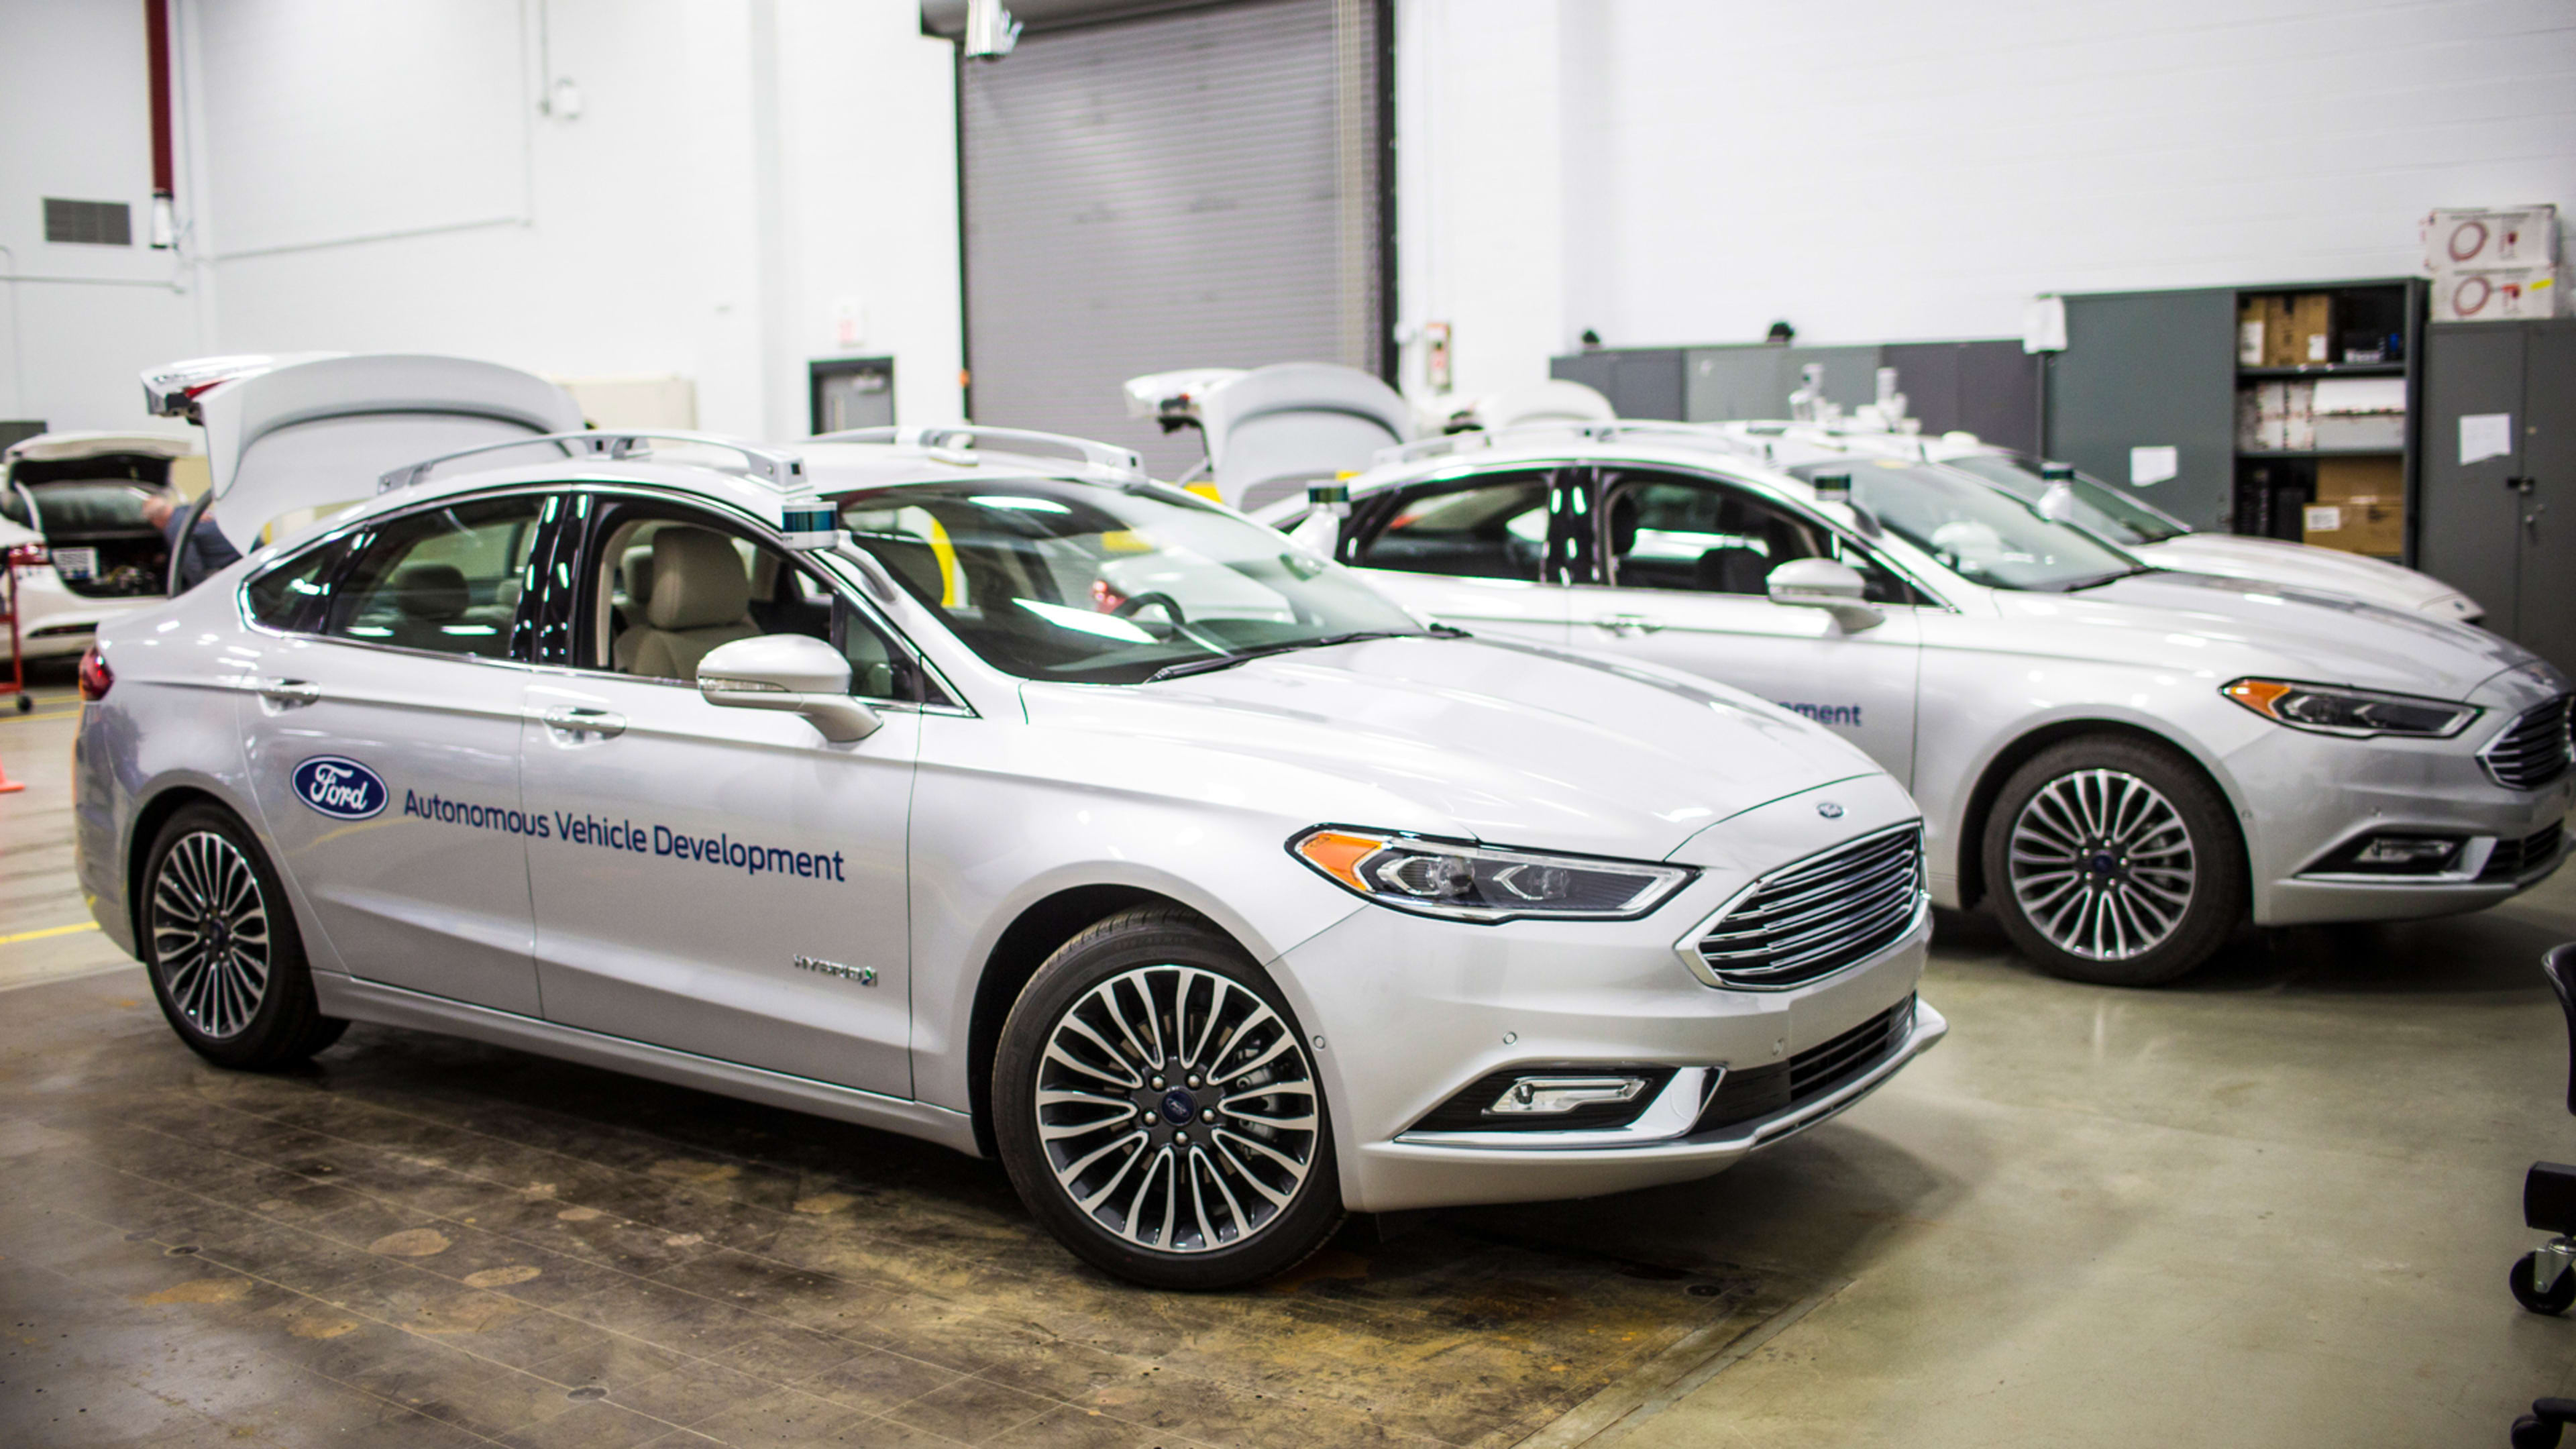 Ford CEO confession: We “overestimated” the arrival of self-driving cars